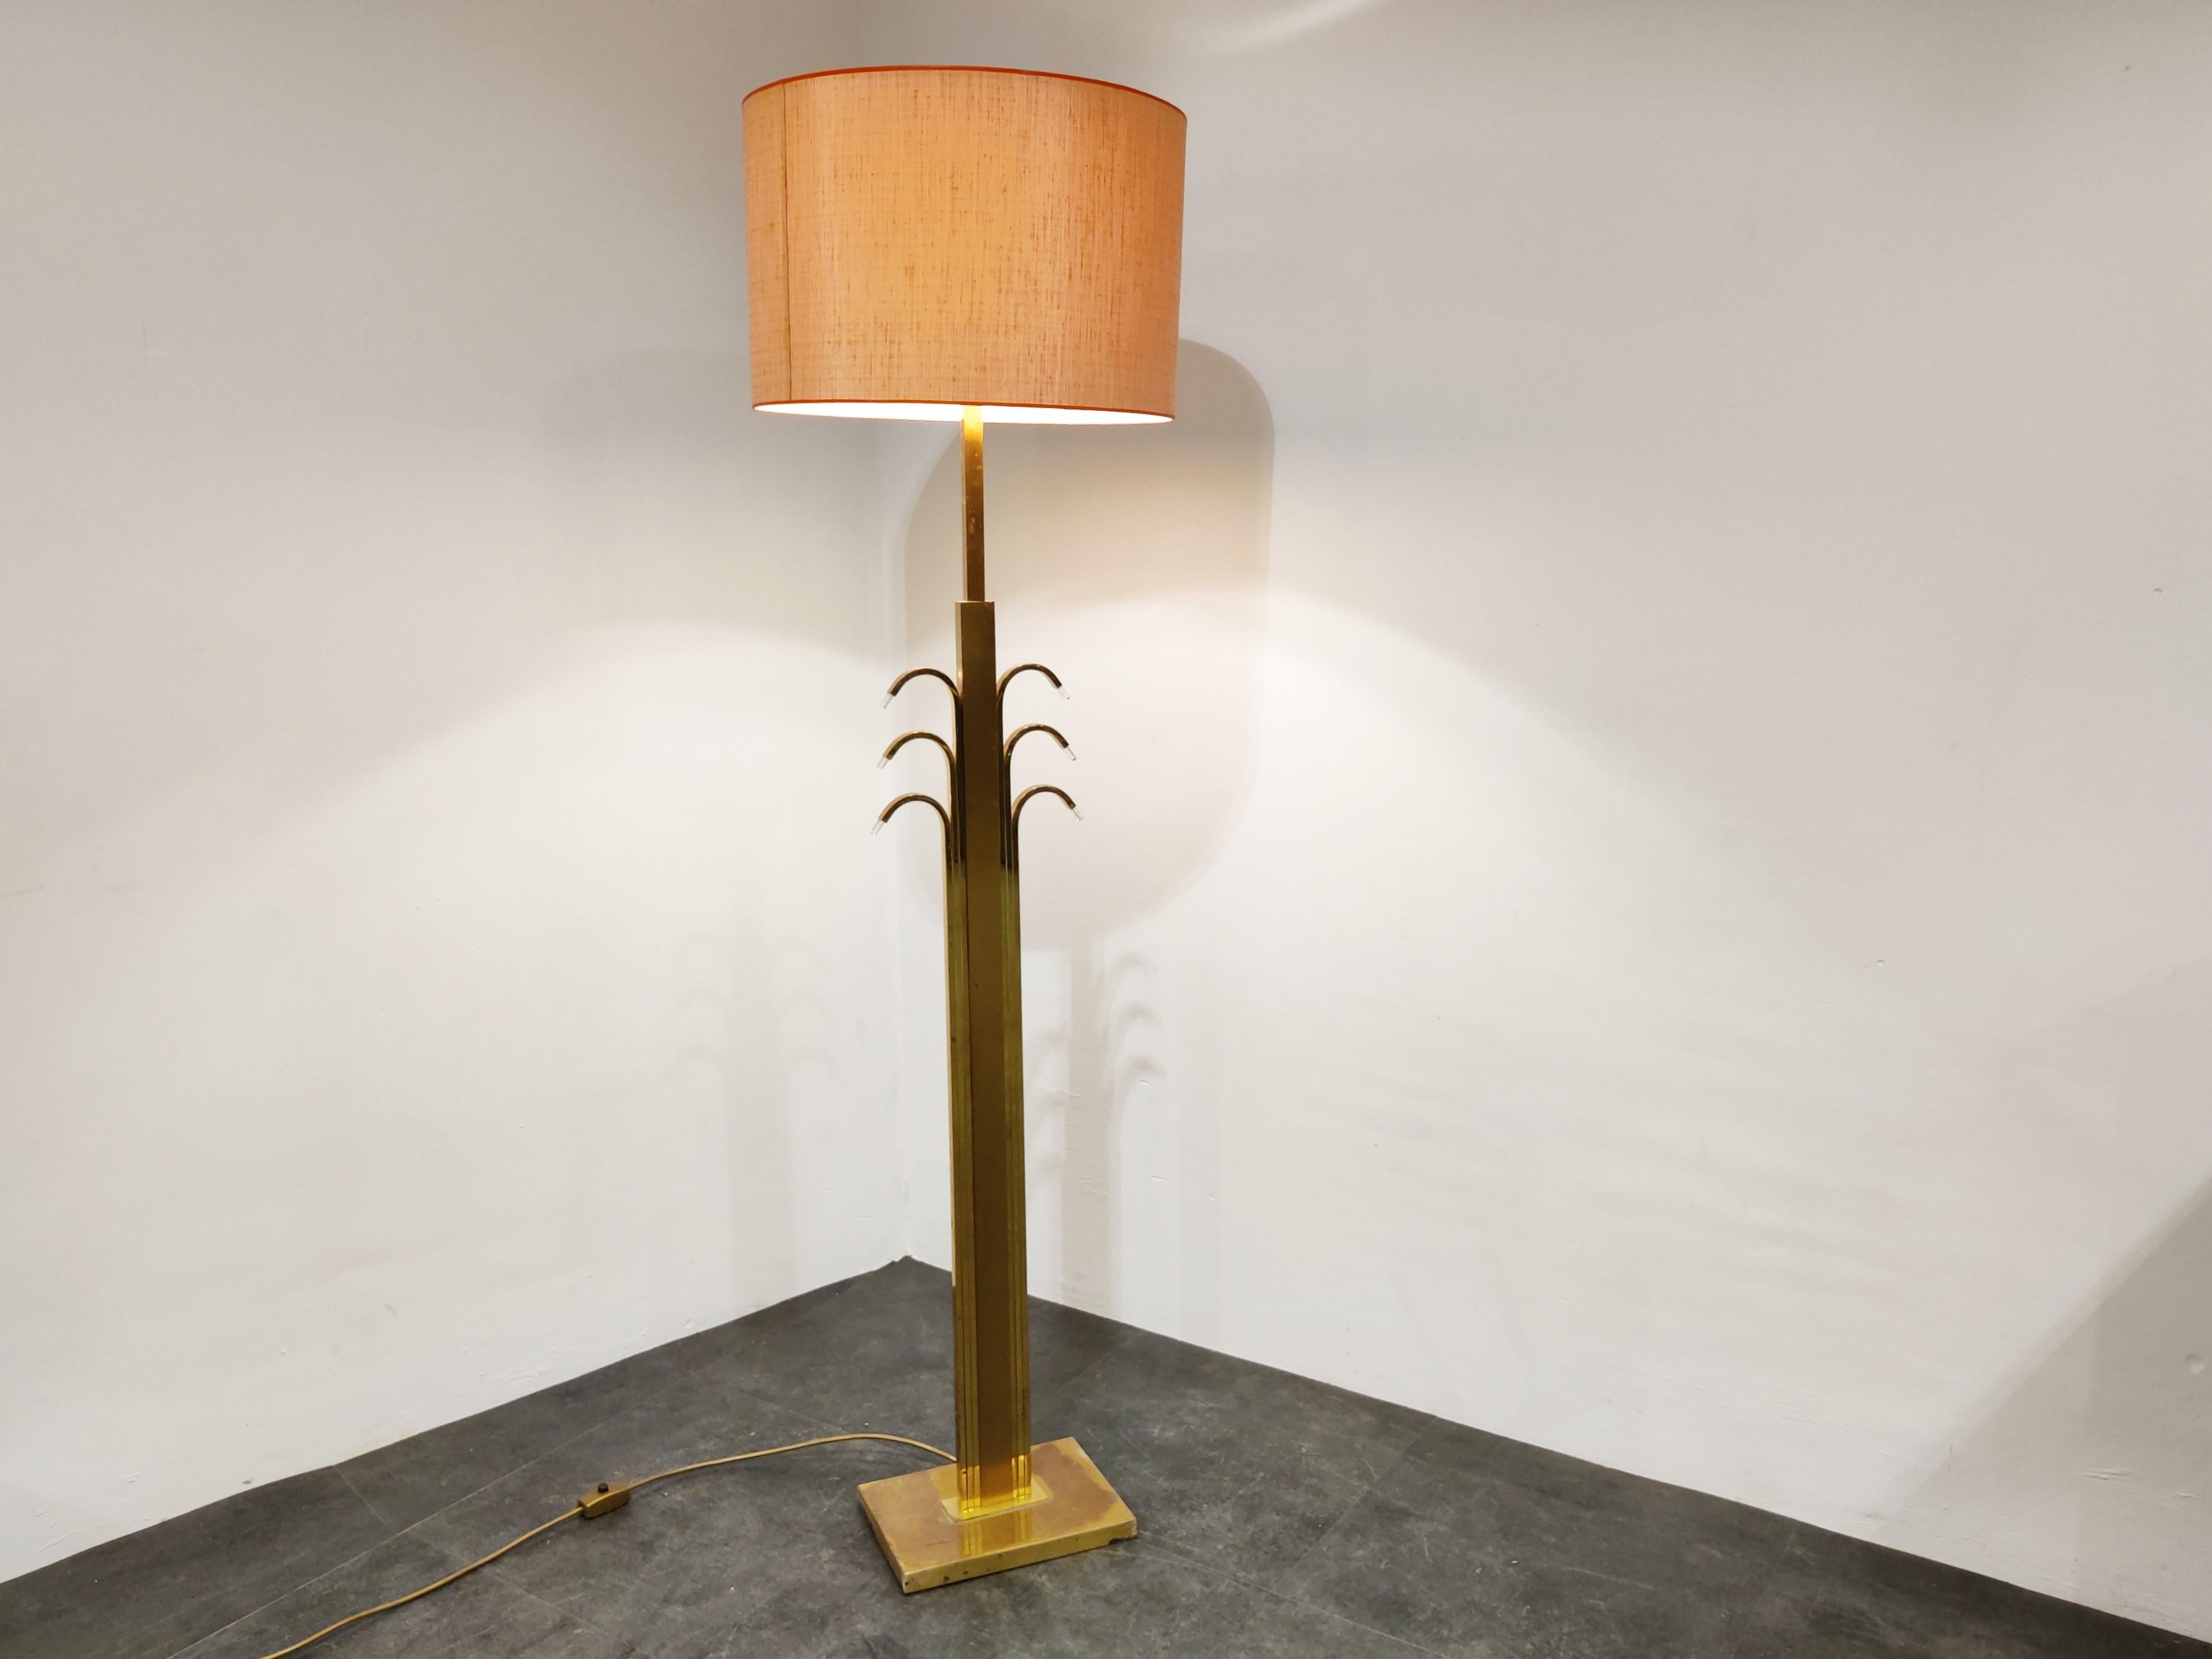 Large brass and glass tip floor lamp.

Comes with a vintage lamp shade.

Tested and ready for use with a regular E26/E27 light bulb.

Condition, overall good condition, wear/patina to the base

1970s, Germany

Dimensions:
Height